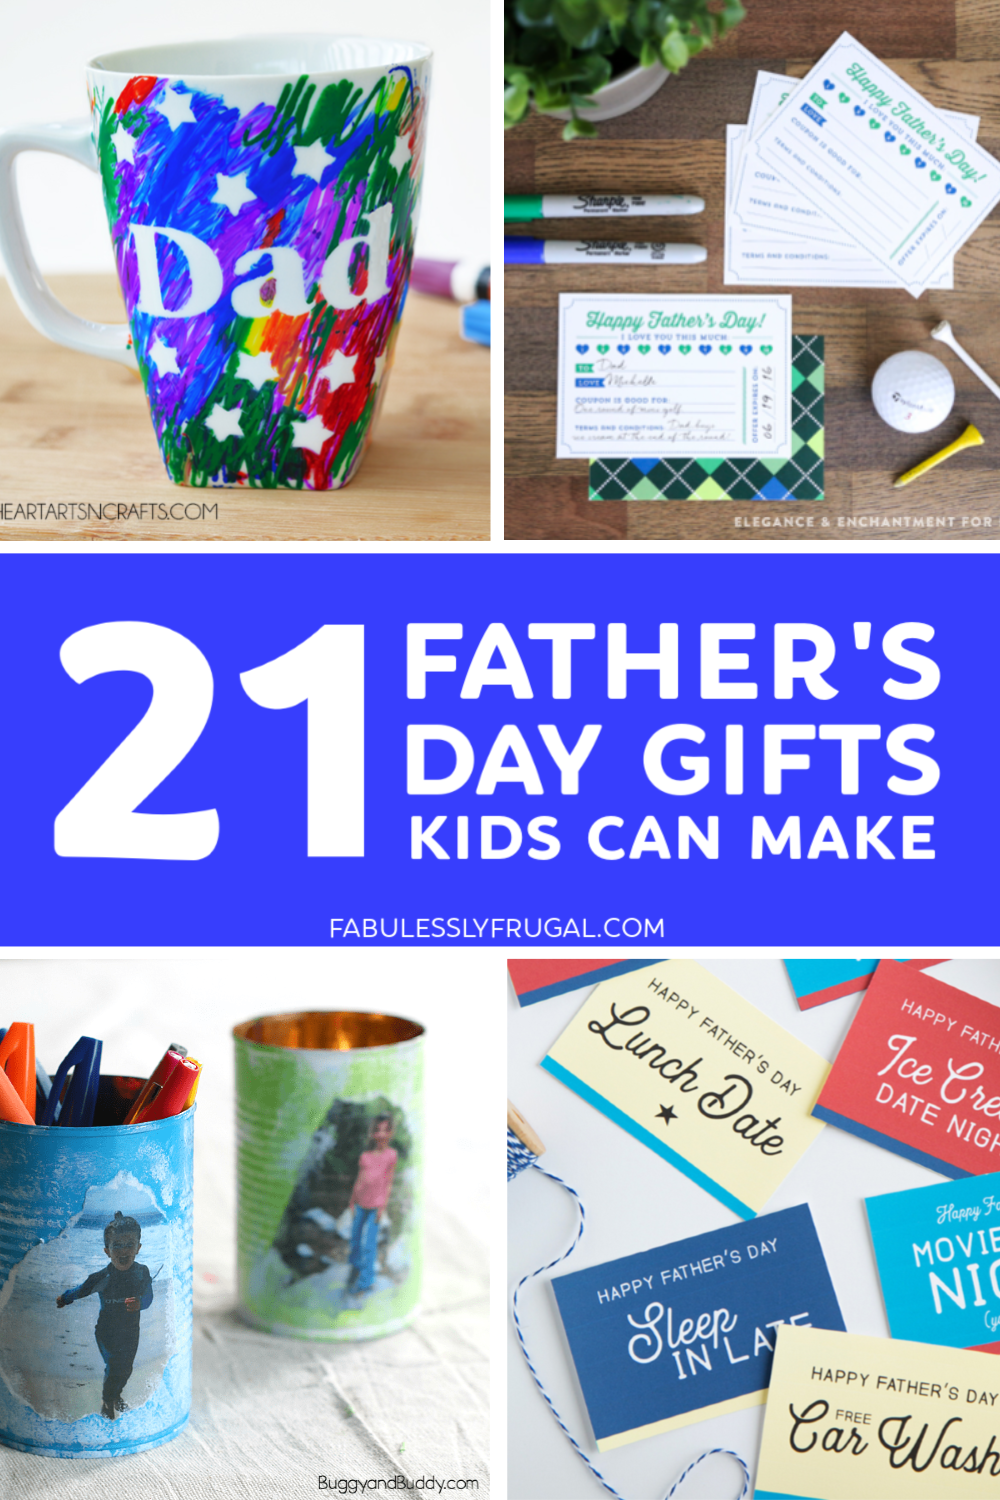 Homemade Father's Day gifts